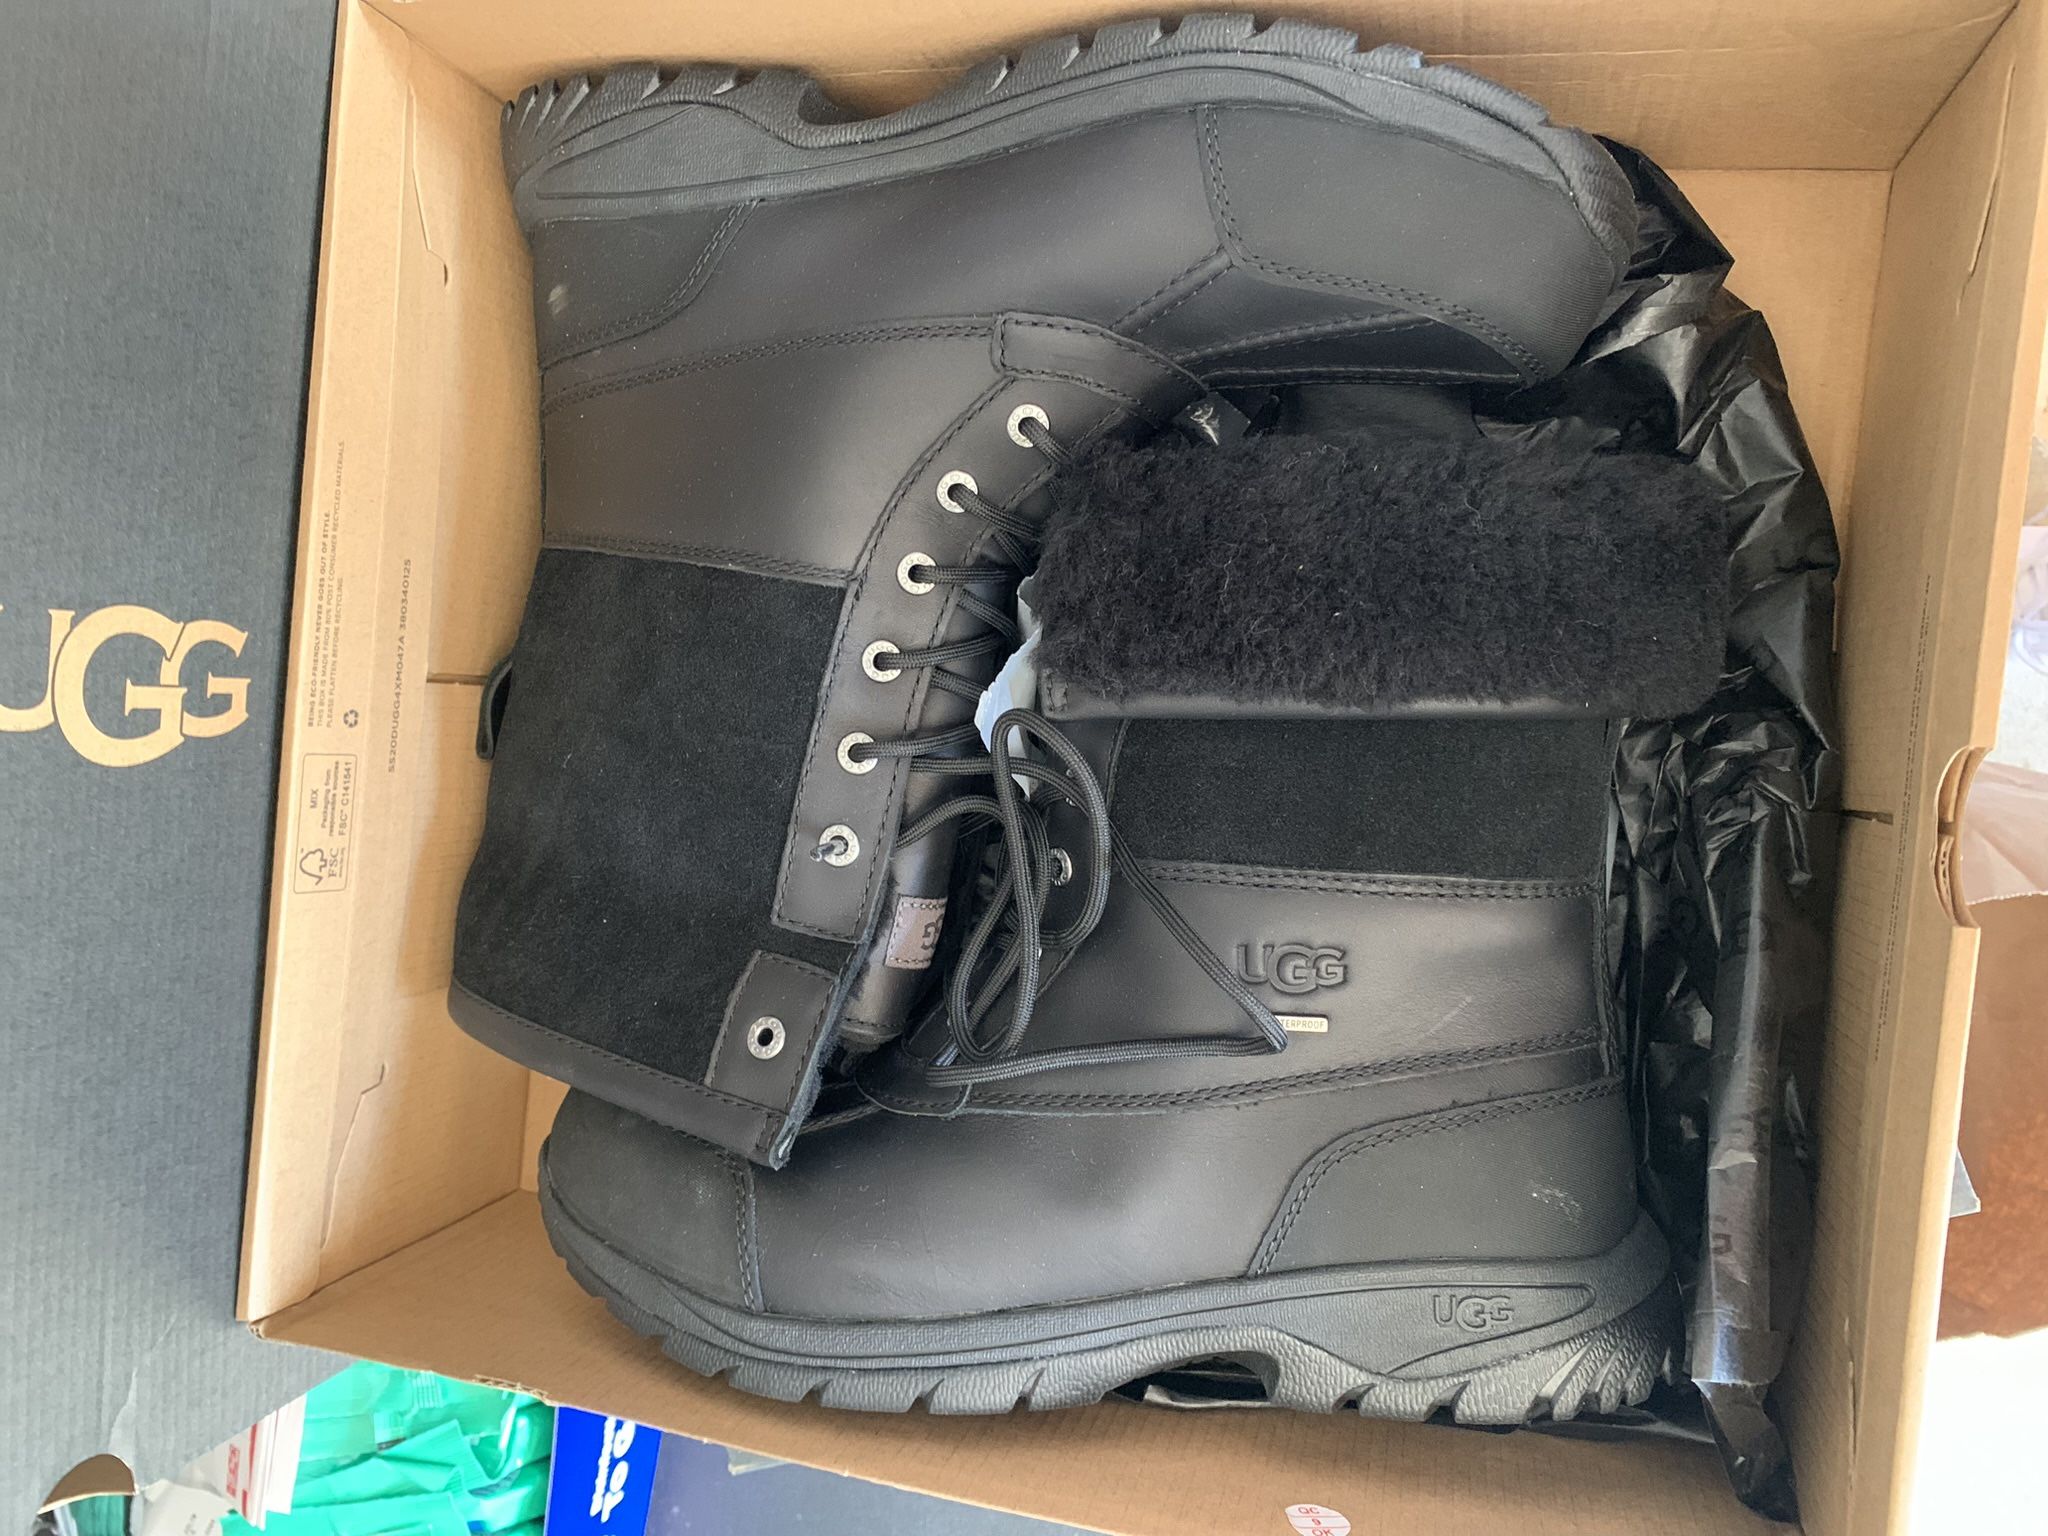 Brand NEW Ugg Butte Boots Size 9